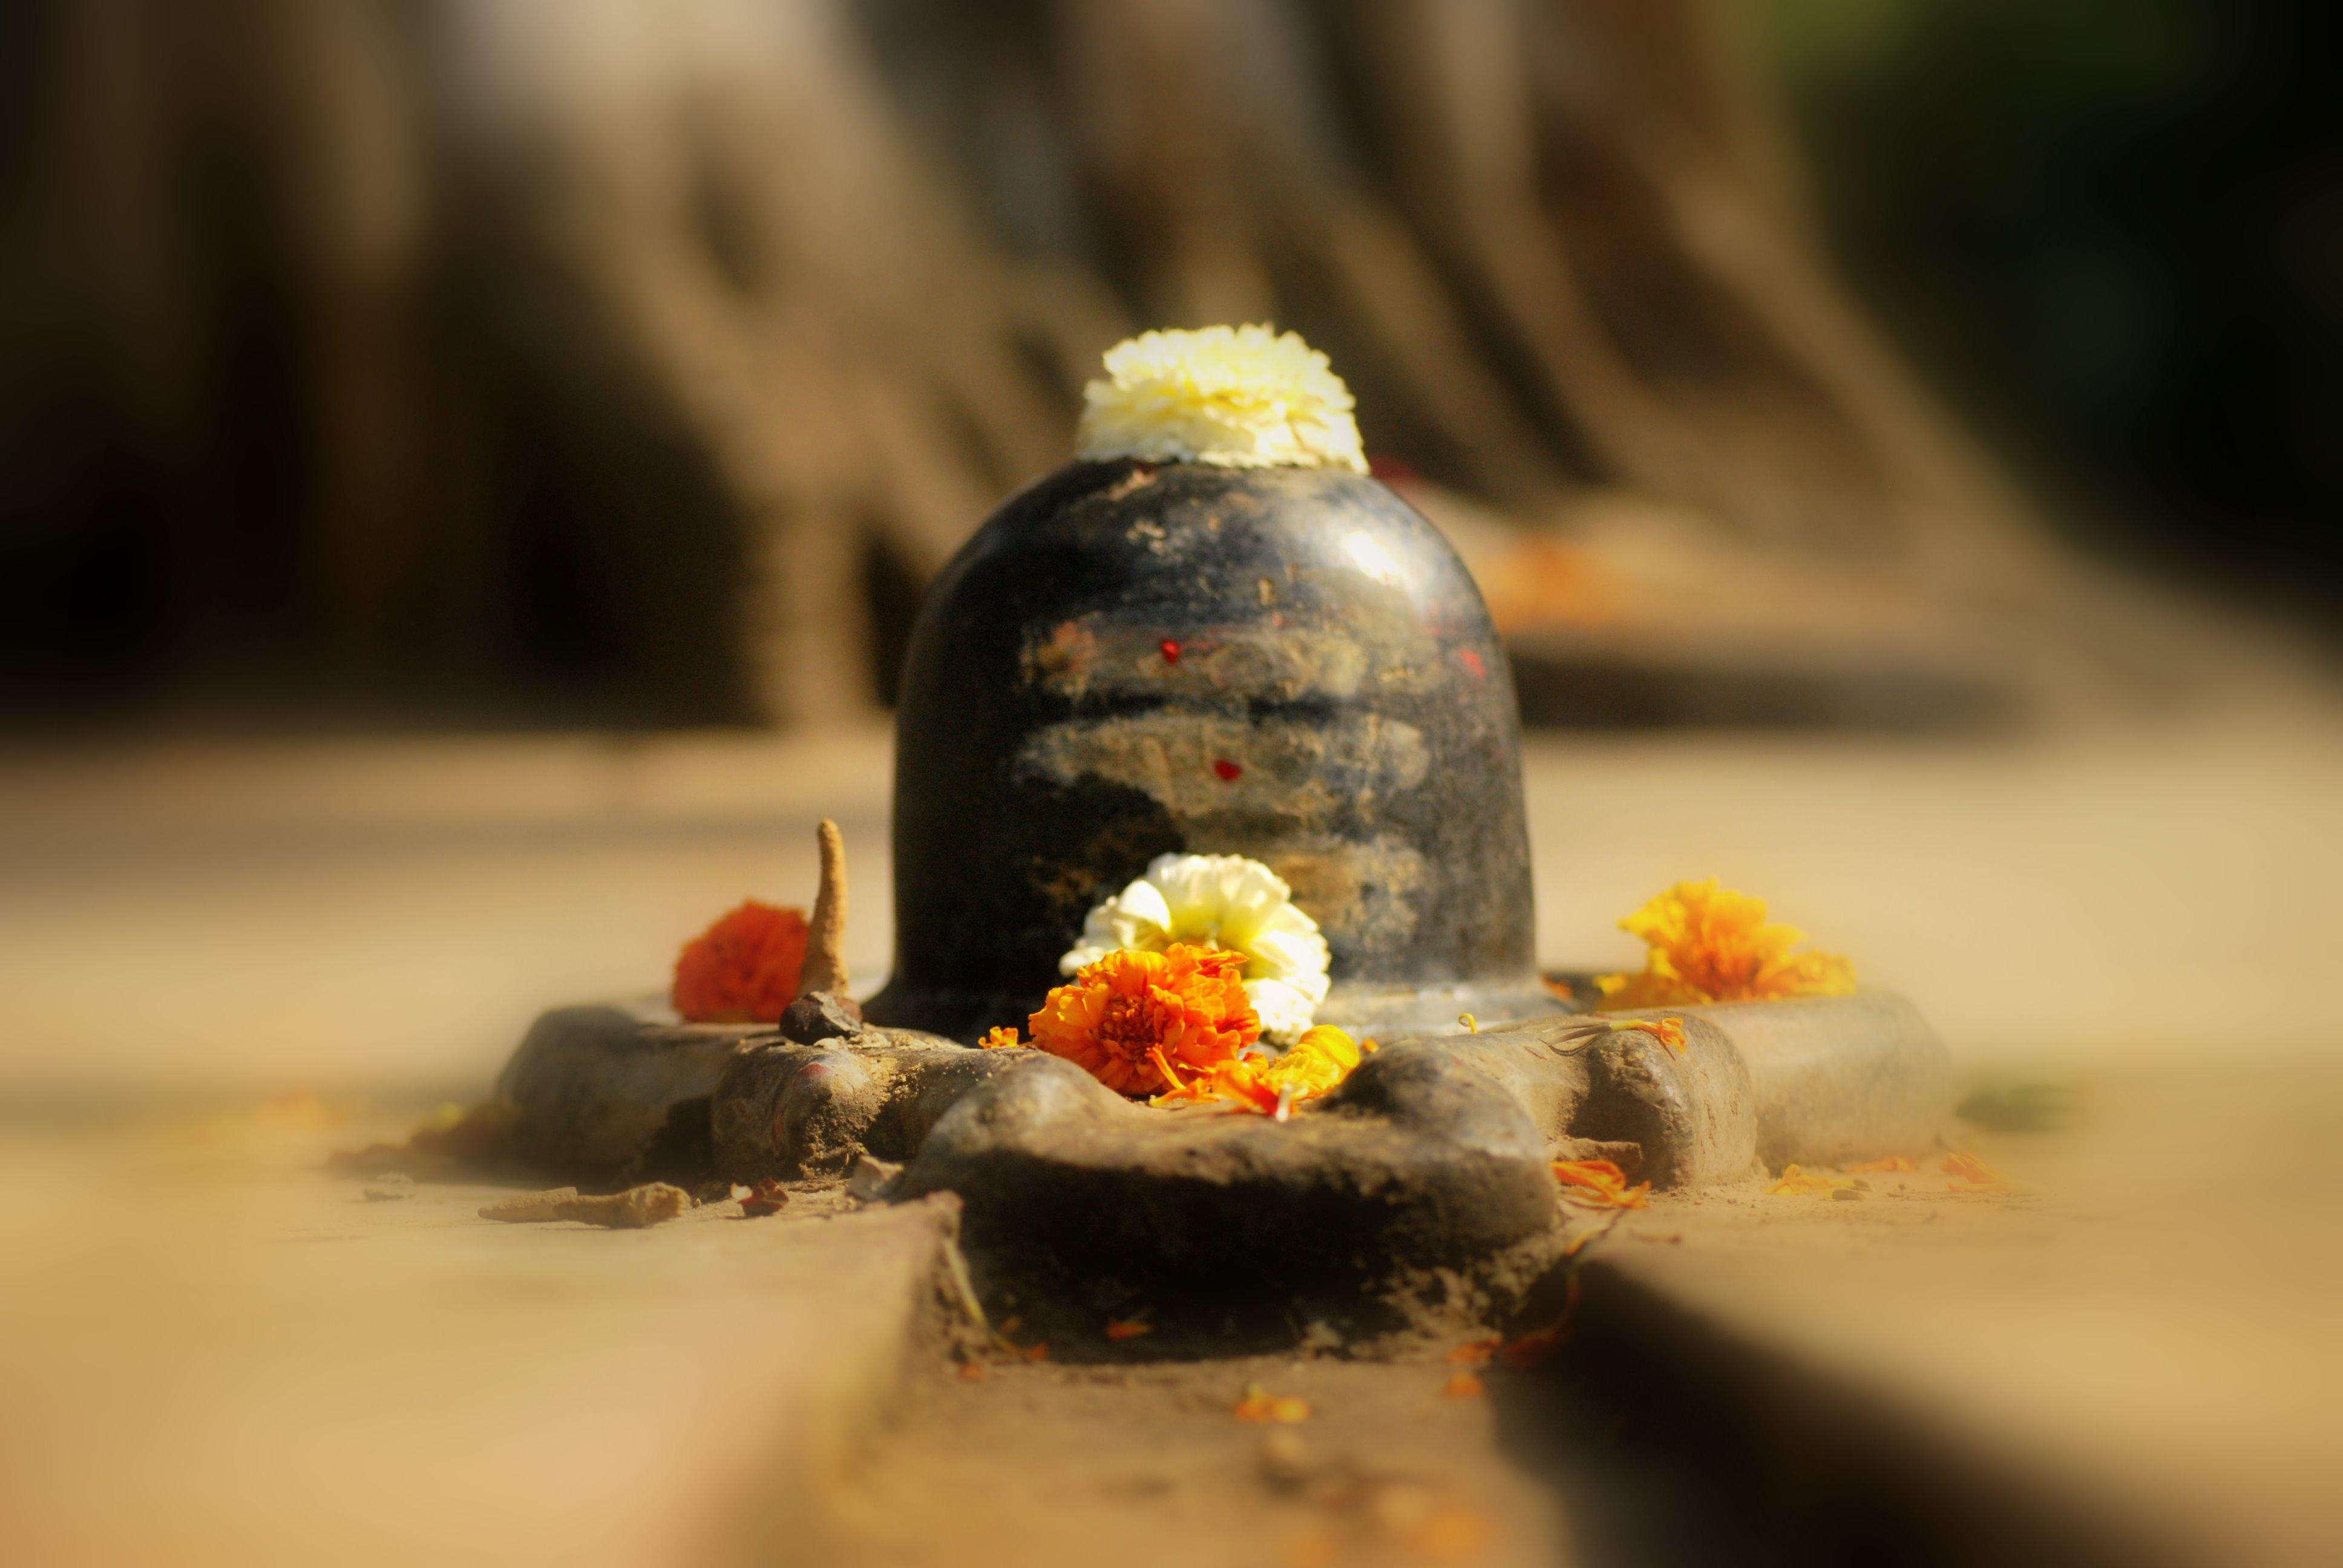 Lingam Wallpapers Wallpaper Cave Find & download free graphic resources for shivling. lingam wallpapers wallpaper cave